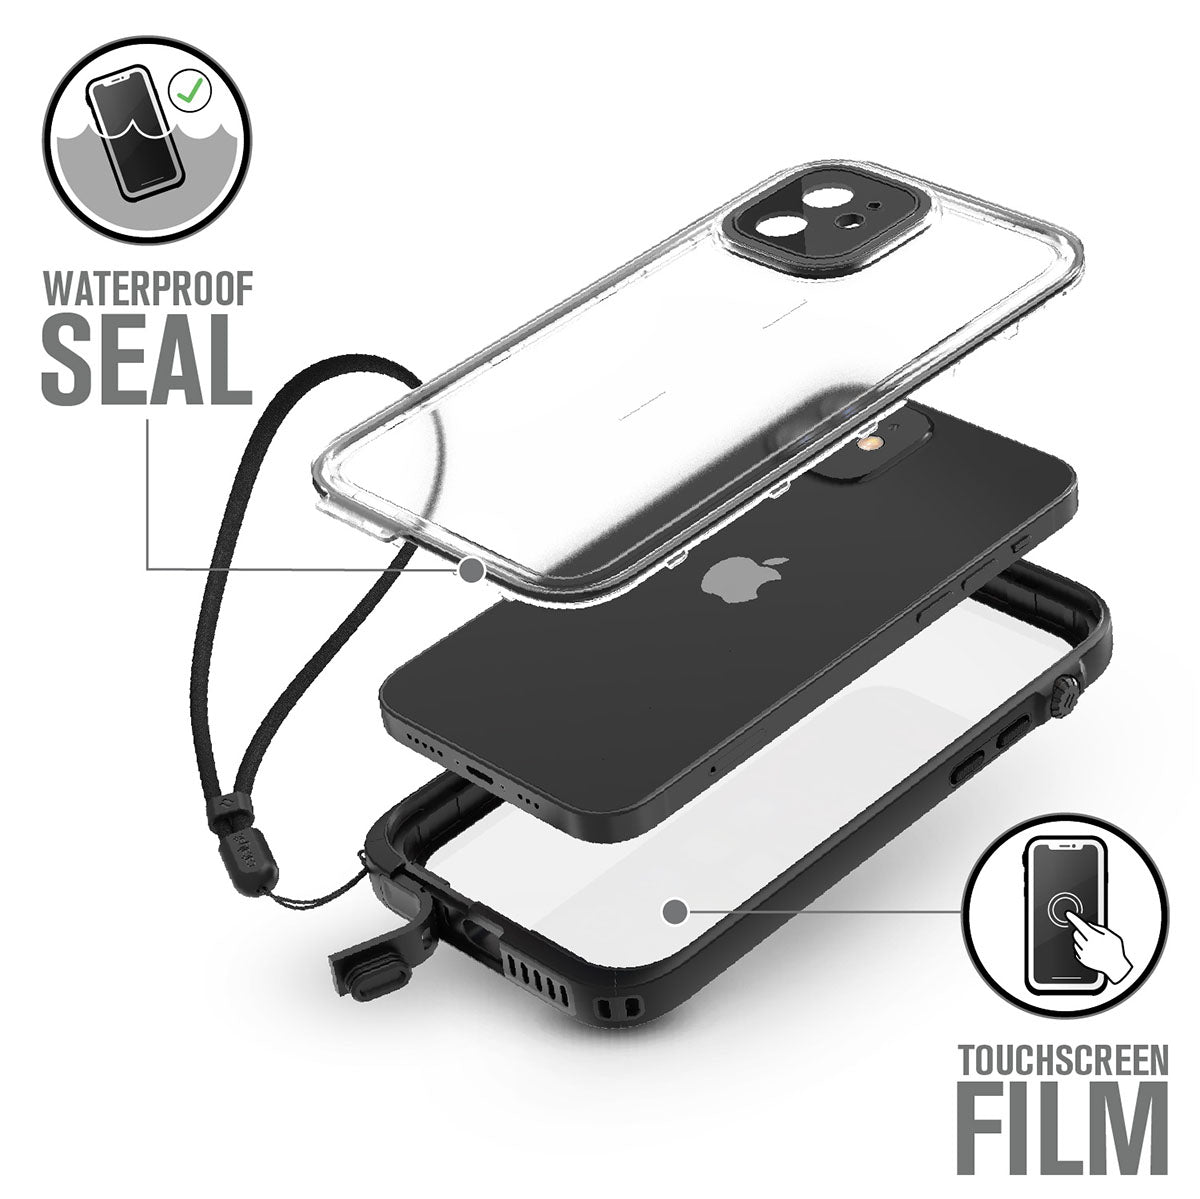 Catalyst iPhone 12 waterproof case total protectionshowing parts of the case Text reads waterproof seal touchscreen film 